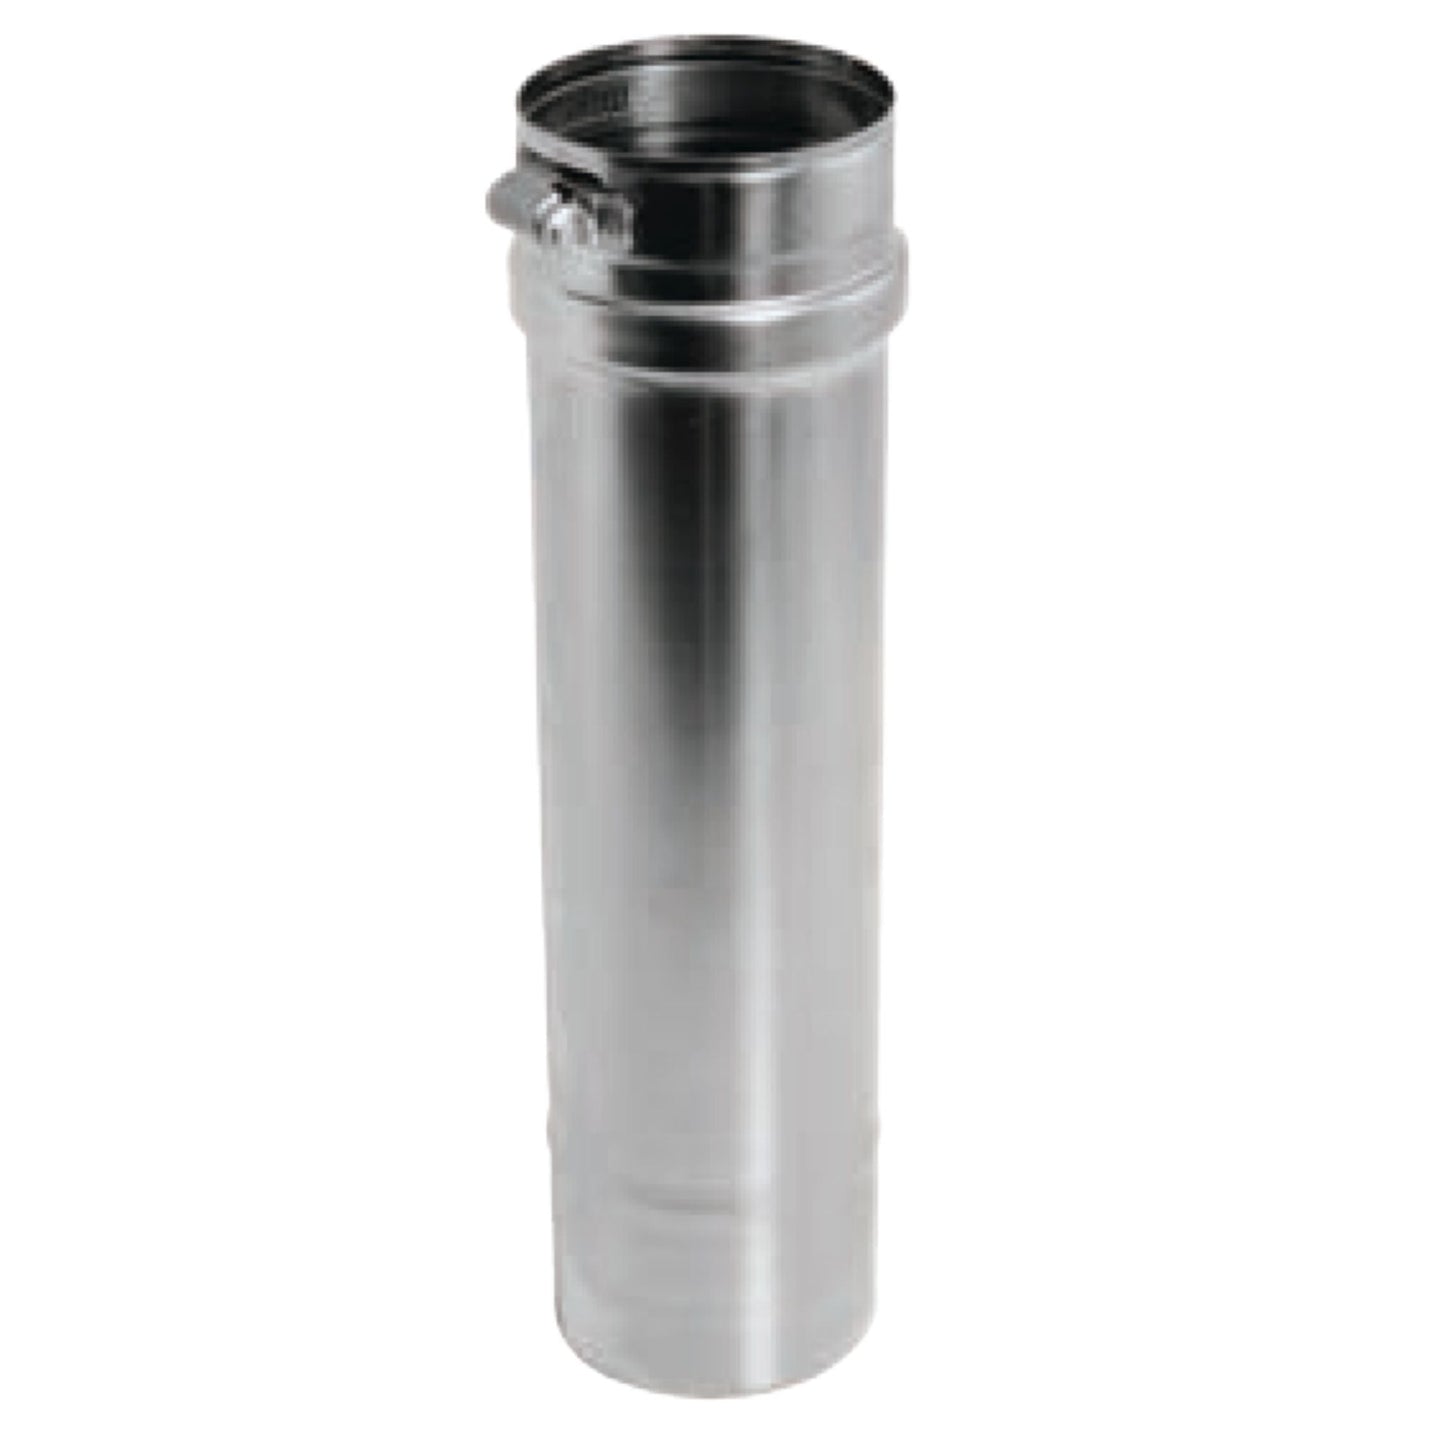 DuraVent FasNSeal 6" x 18" 316L Stainless Steel Vent Length